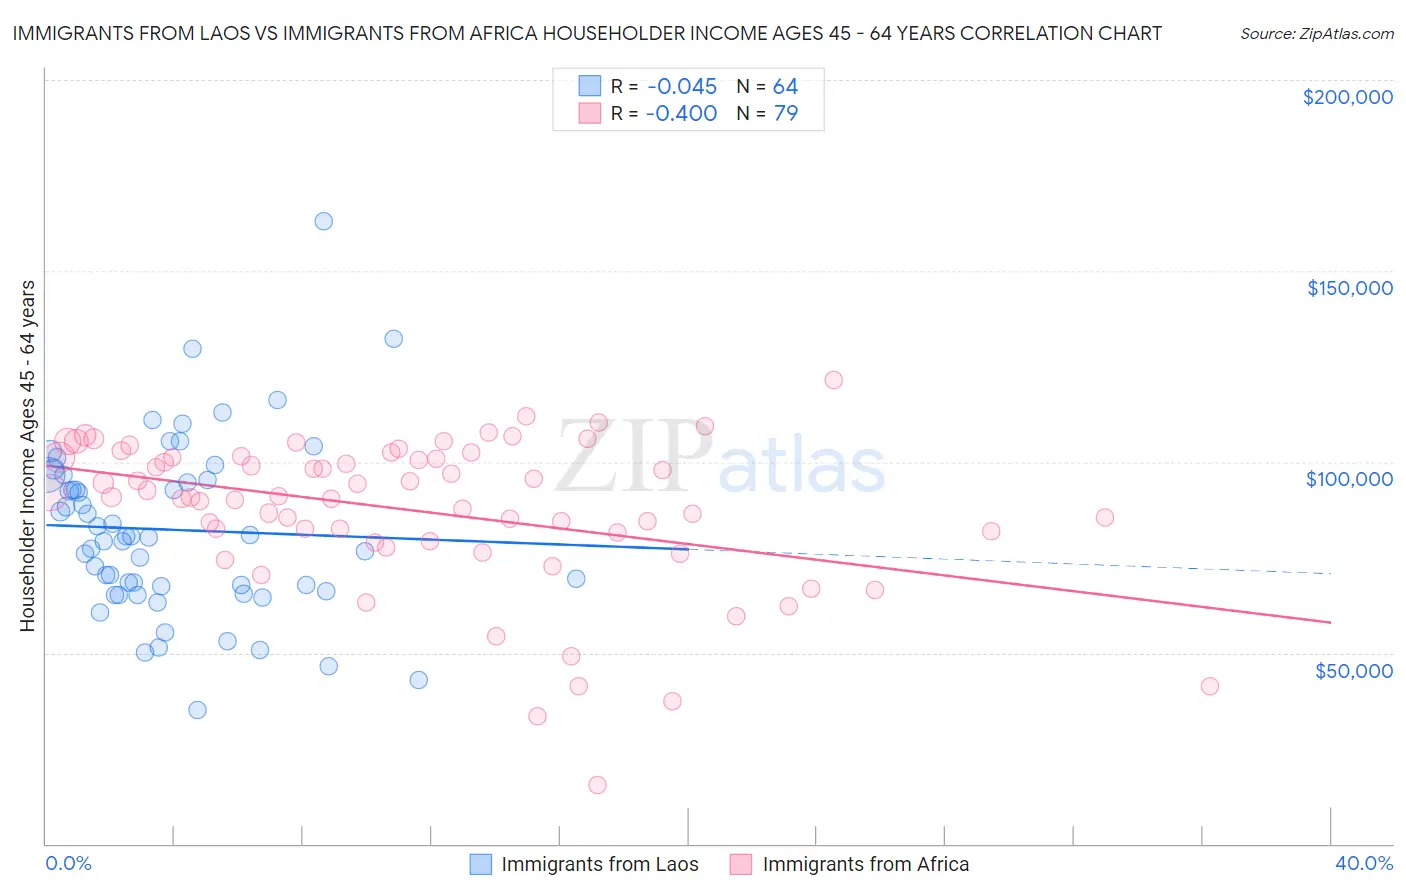 Immigrants from Laos vs Immigrants from Africa Householder Income Ages 45 - 64 years